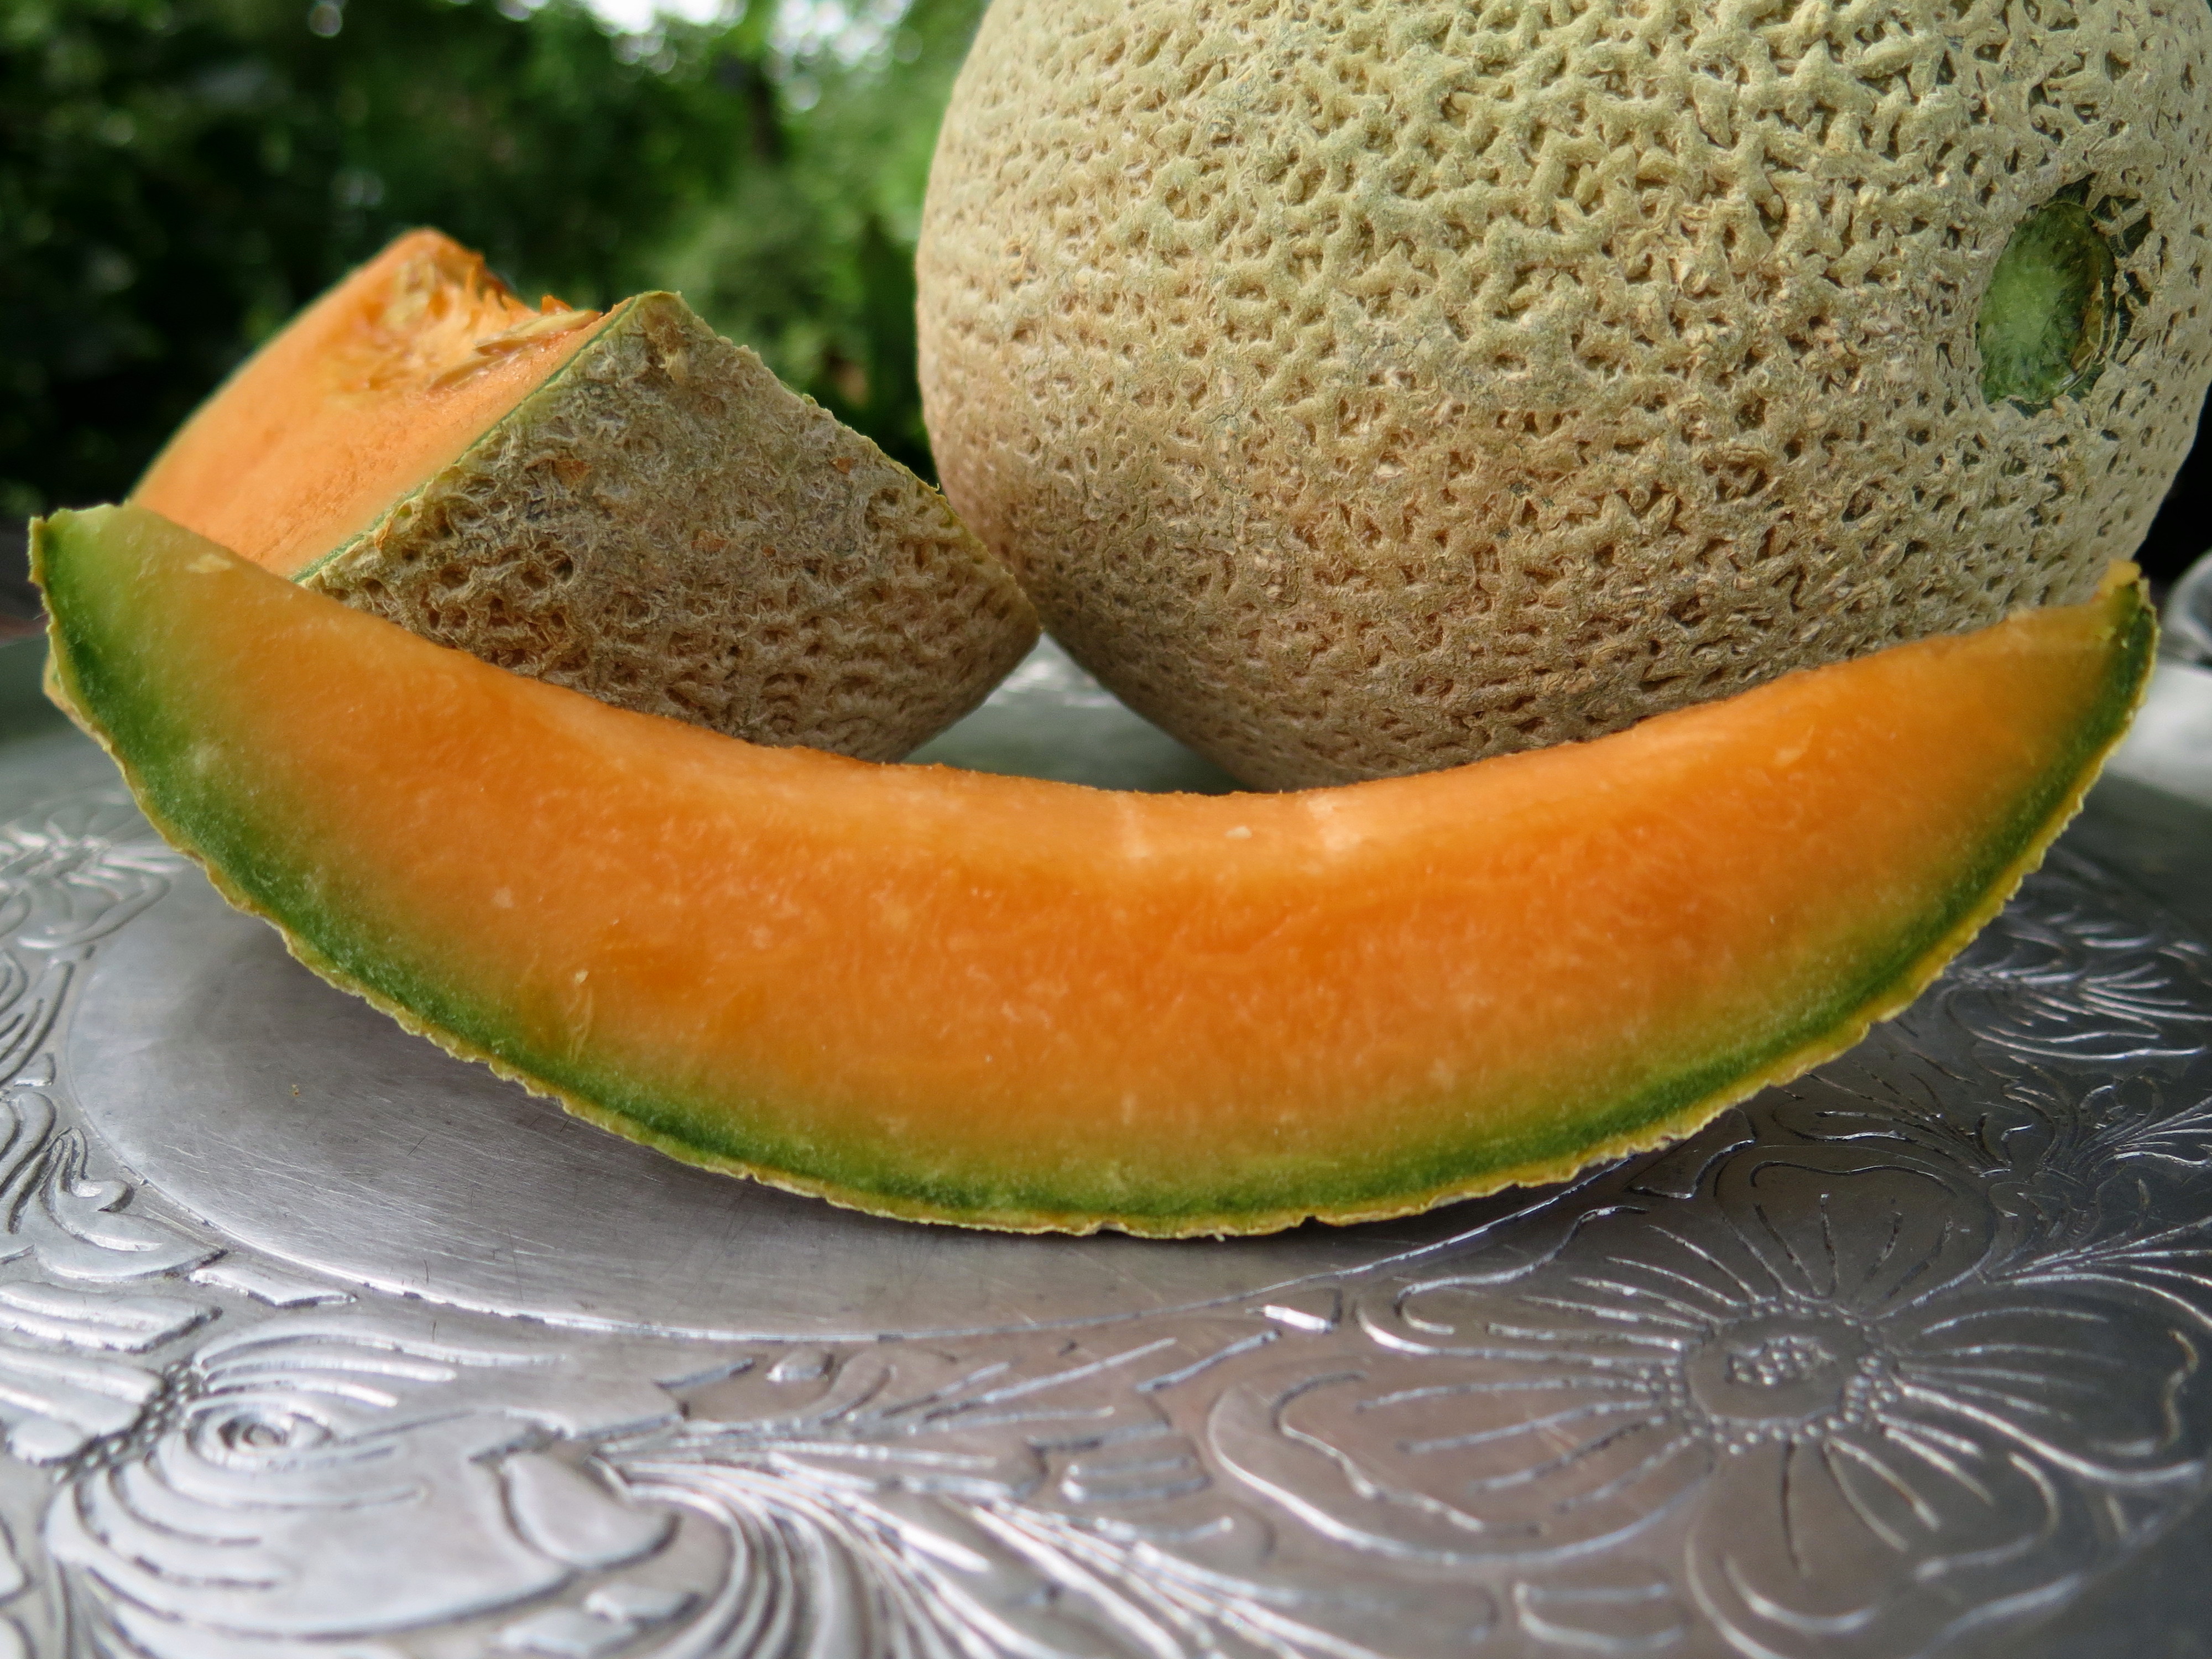 Ripe Cantaloupe in the Summertime | beyondgumbo